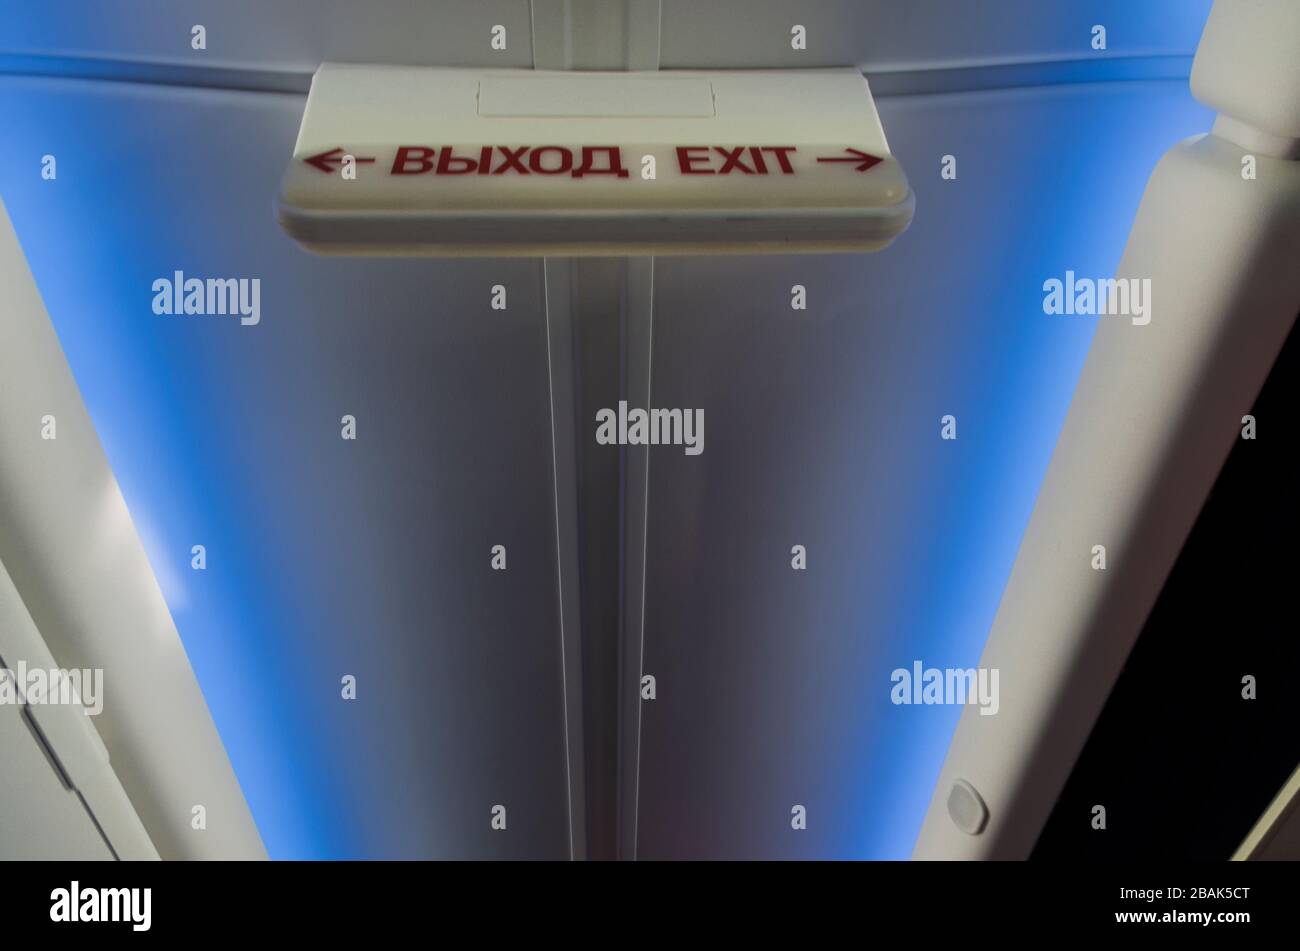 Luminous sign 'exit' in Russian and English inside the aircraft high above the head on a blue background with illumination Stock Photo